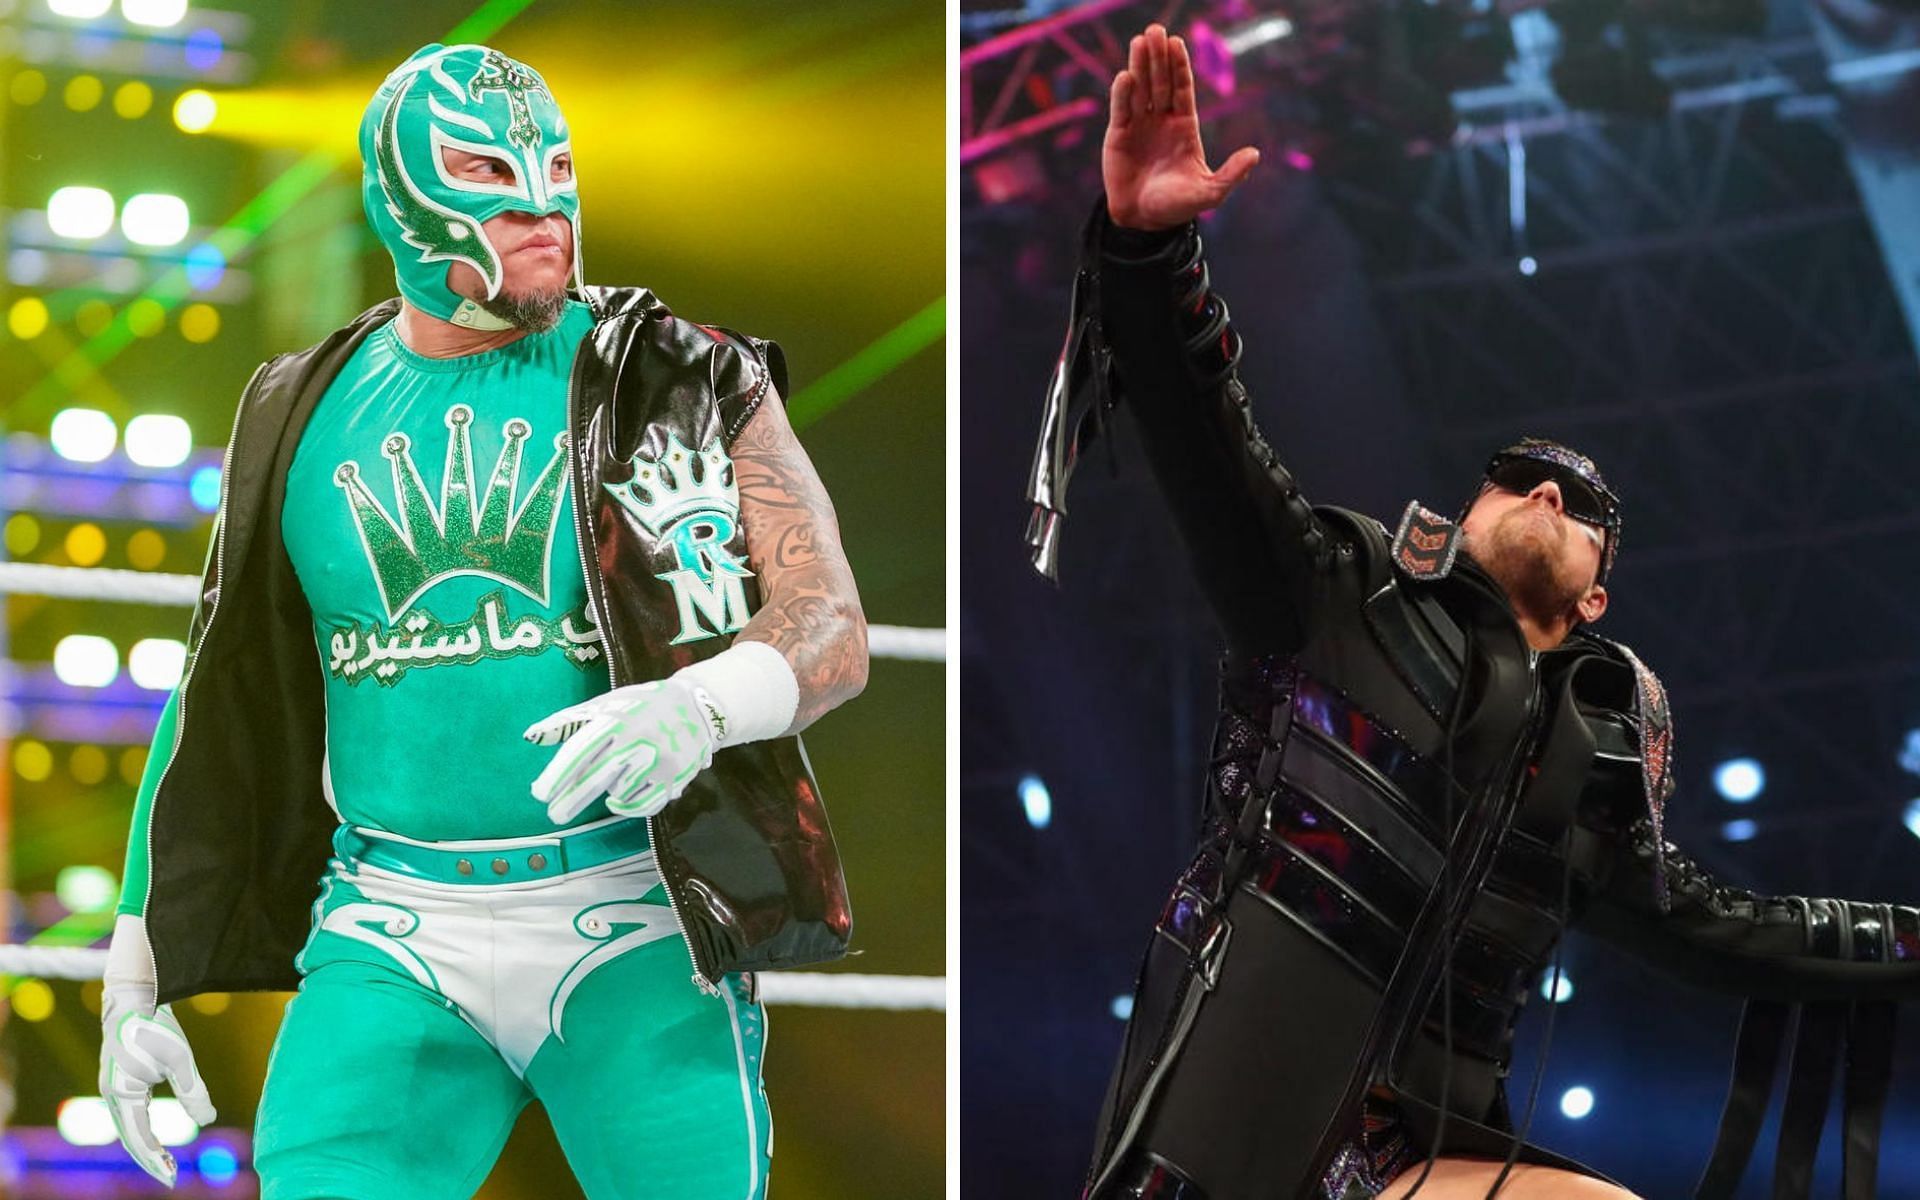 Rey Mysterio and The Miz are former WWE Champions!